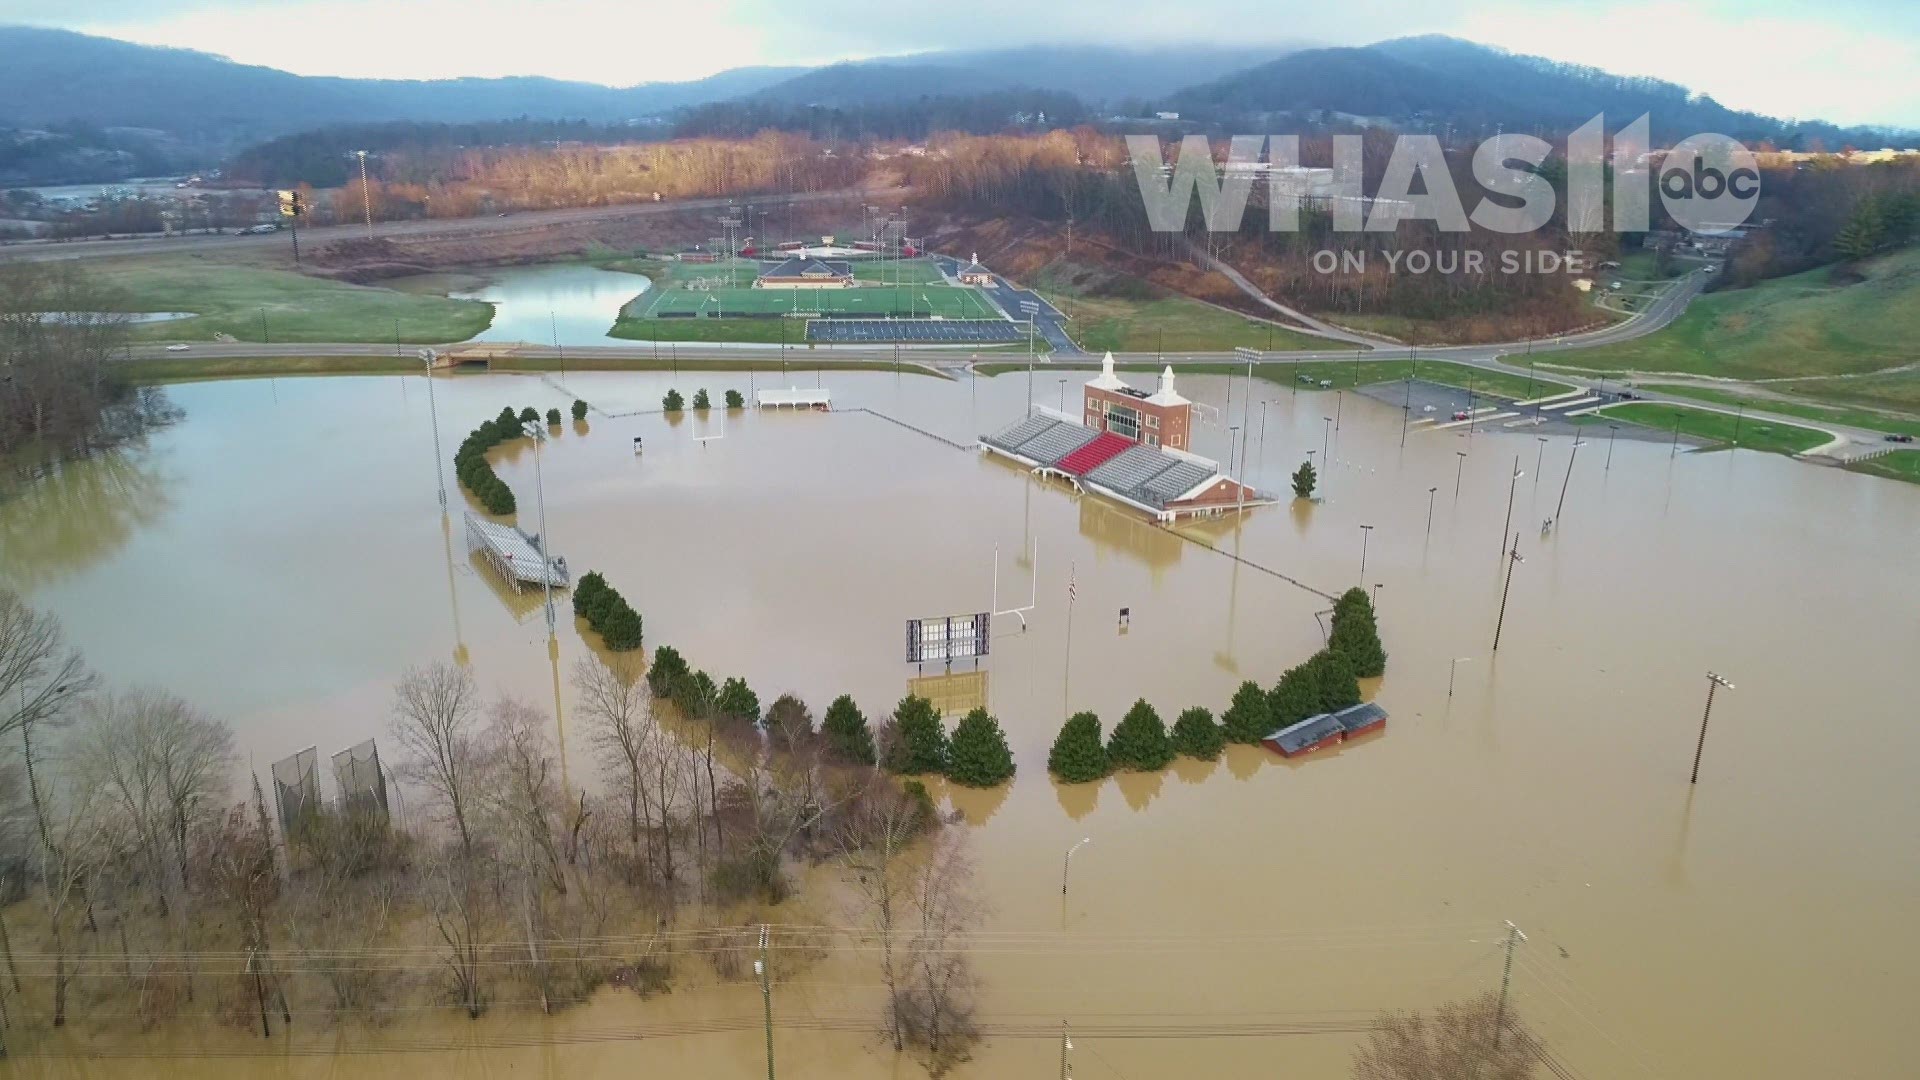 Drone video provided exclusively to WHAS11 News shows extensive flooding in Williamsburg, Kentucky.